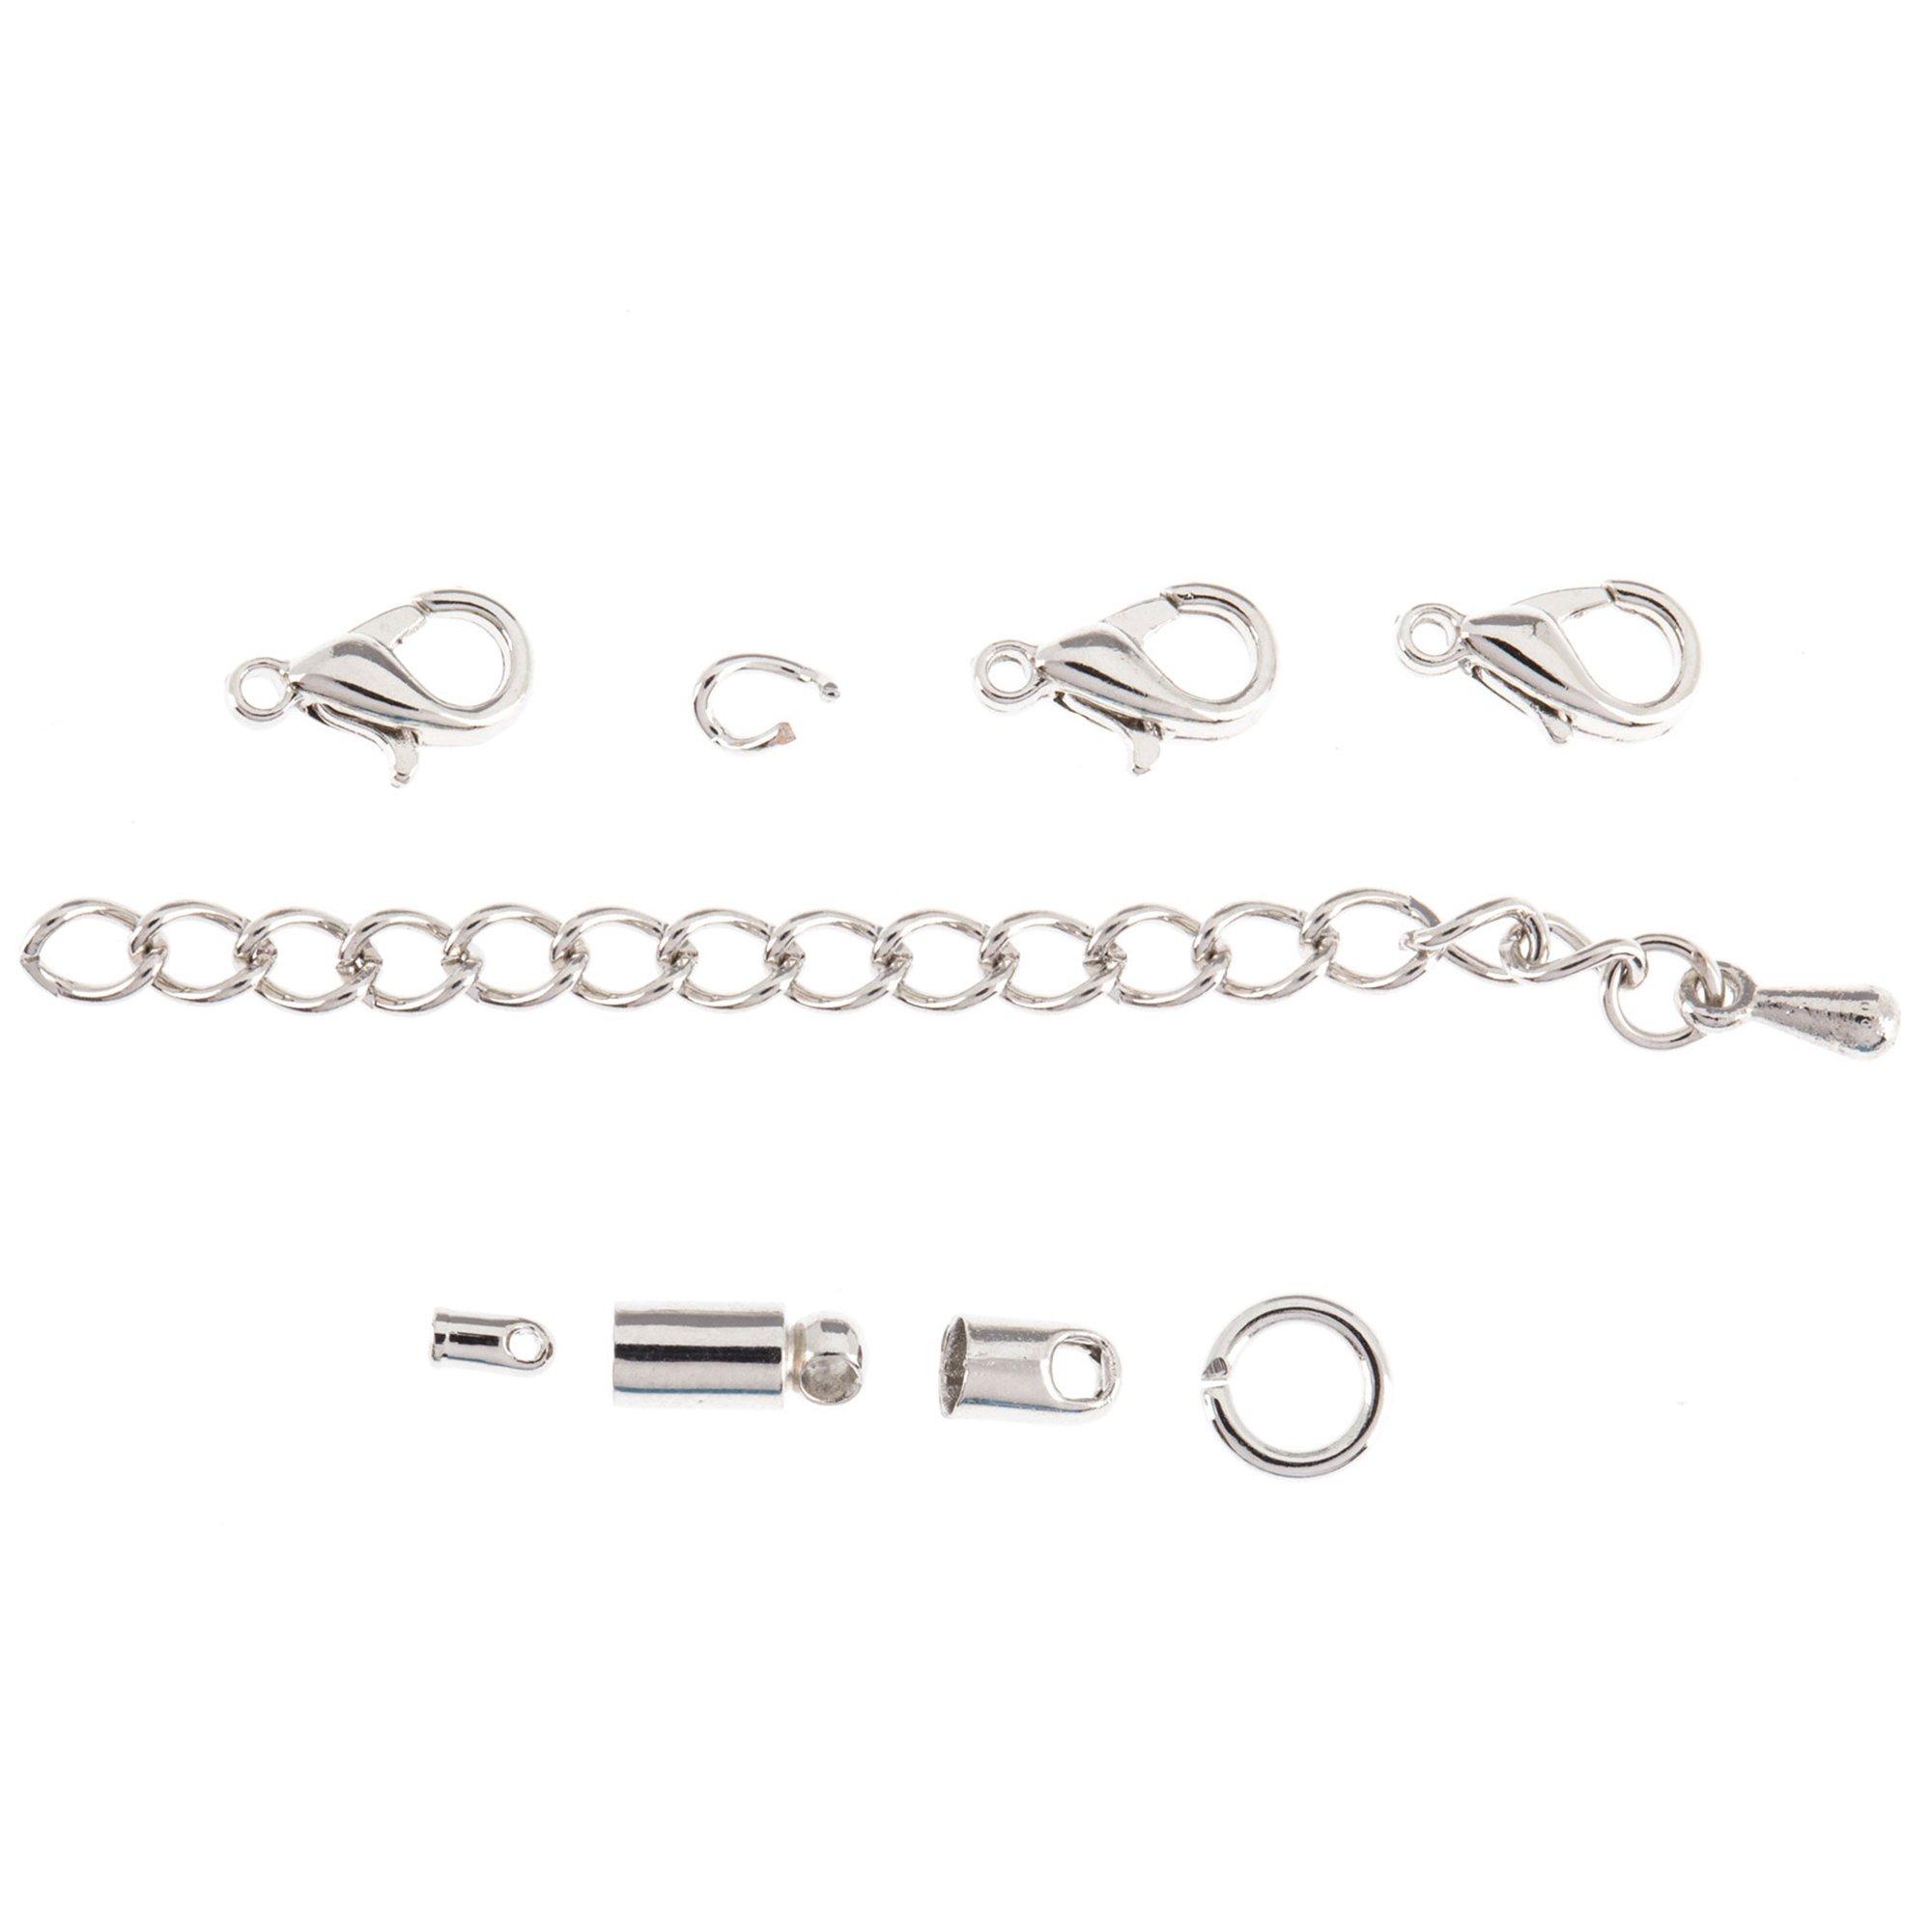 Plastic Lacing Cord Kit with Key Chain Rings, Hooks, Clasps (40 Yd, 100  Pcs), PACK - Kroger